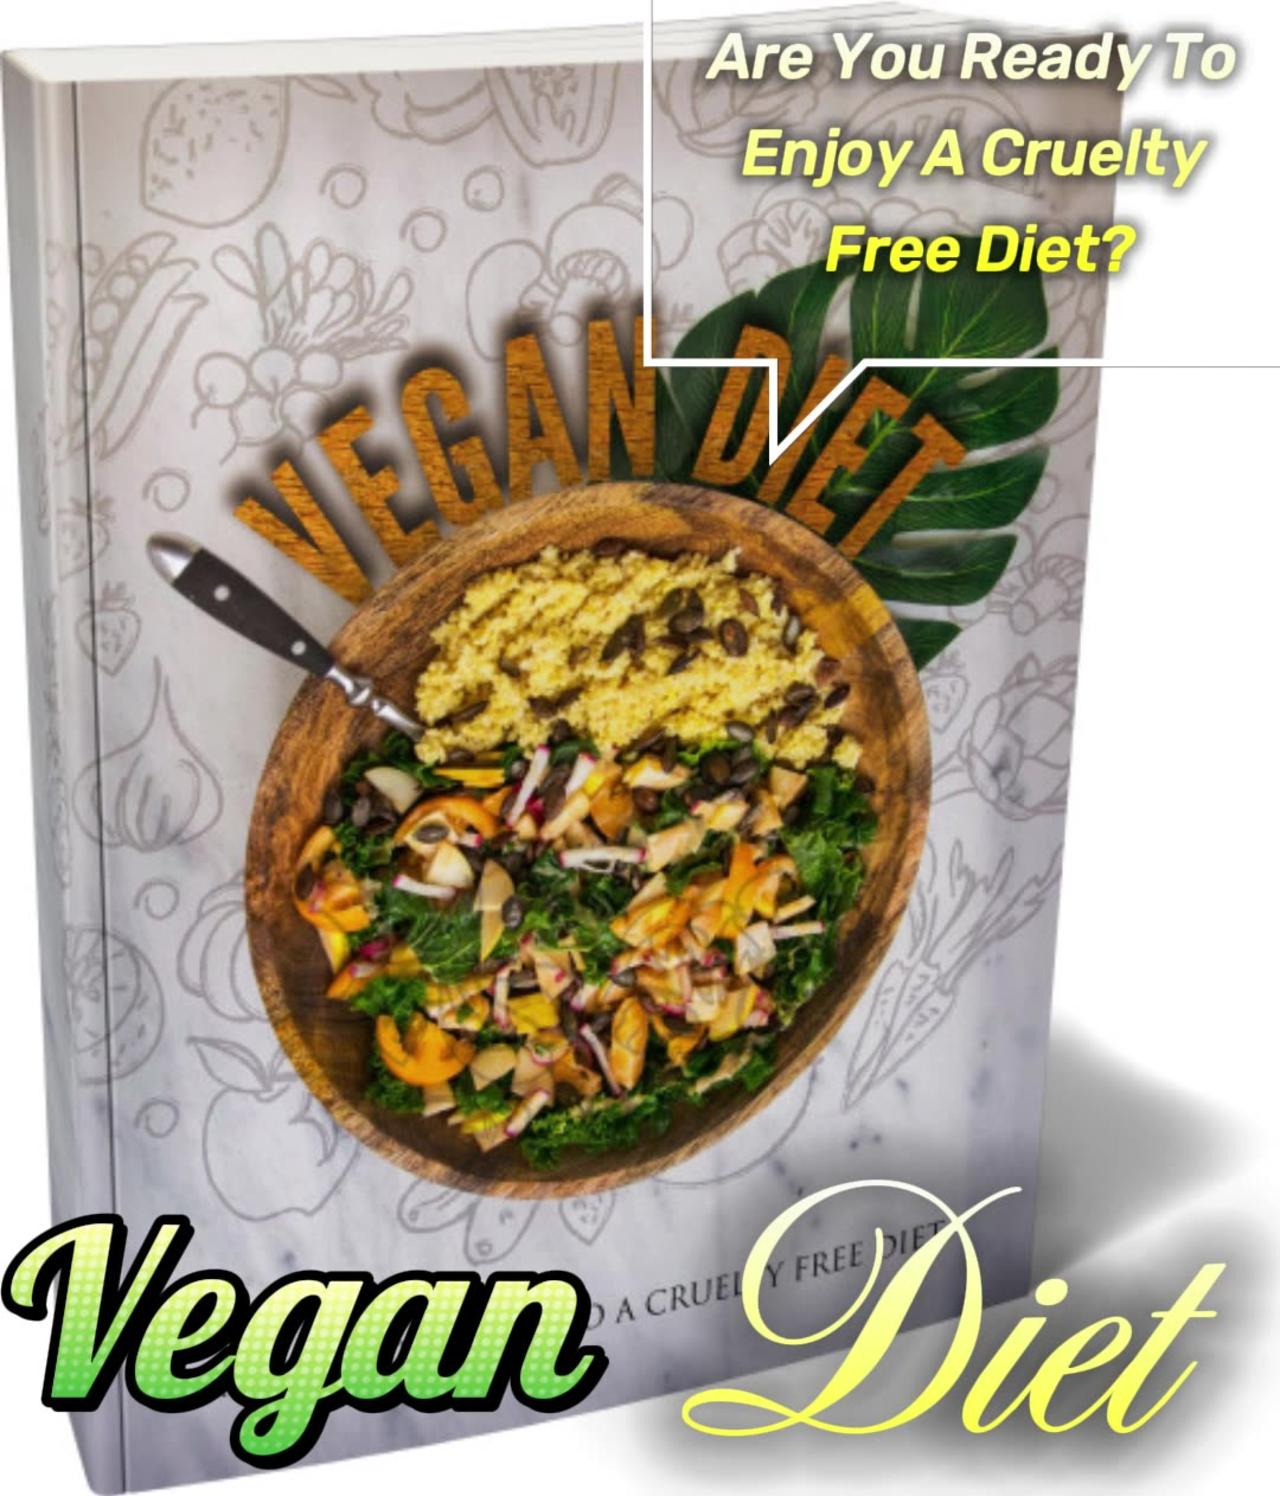 Vegan Diet; Are You Ready To Enjoy A Cruelty Free Diet?